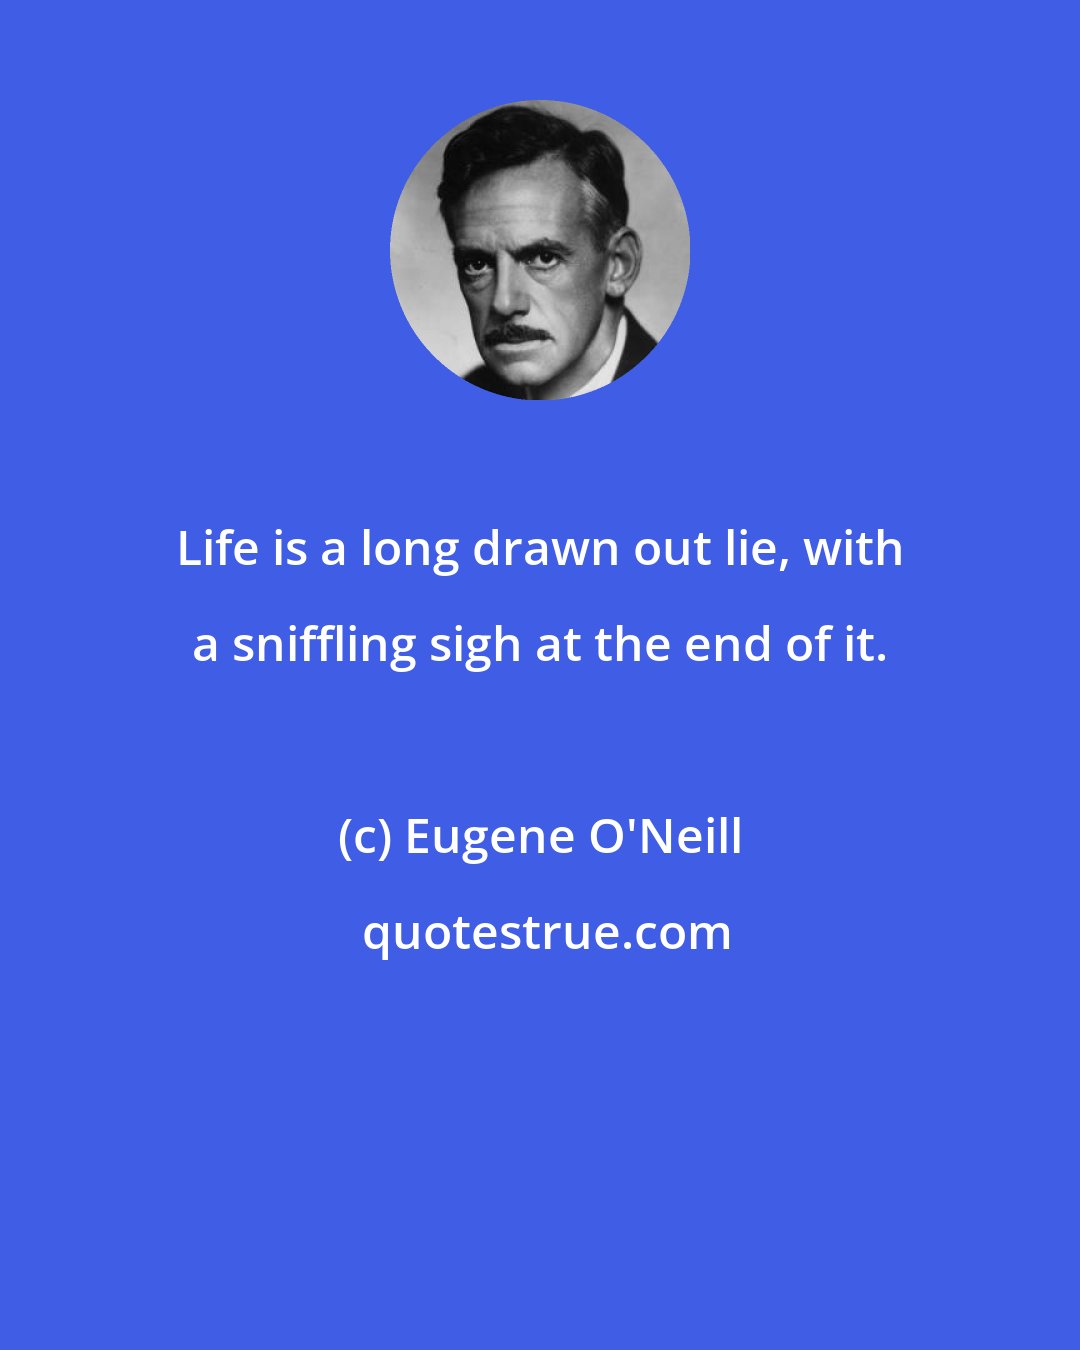 Eugene O'Neill: Life is a long drawn out lie, with a sniffling sigh at the end of it.